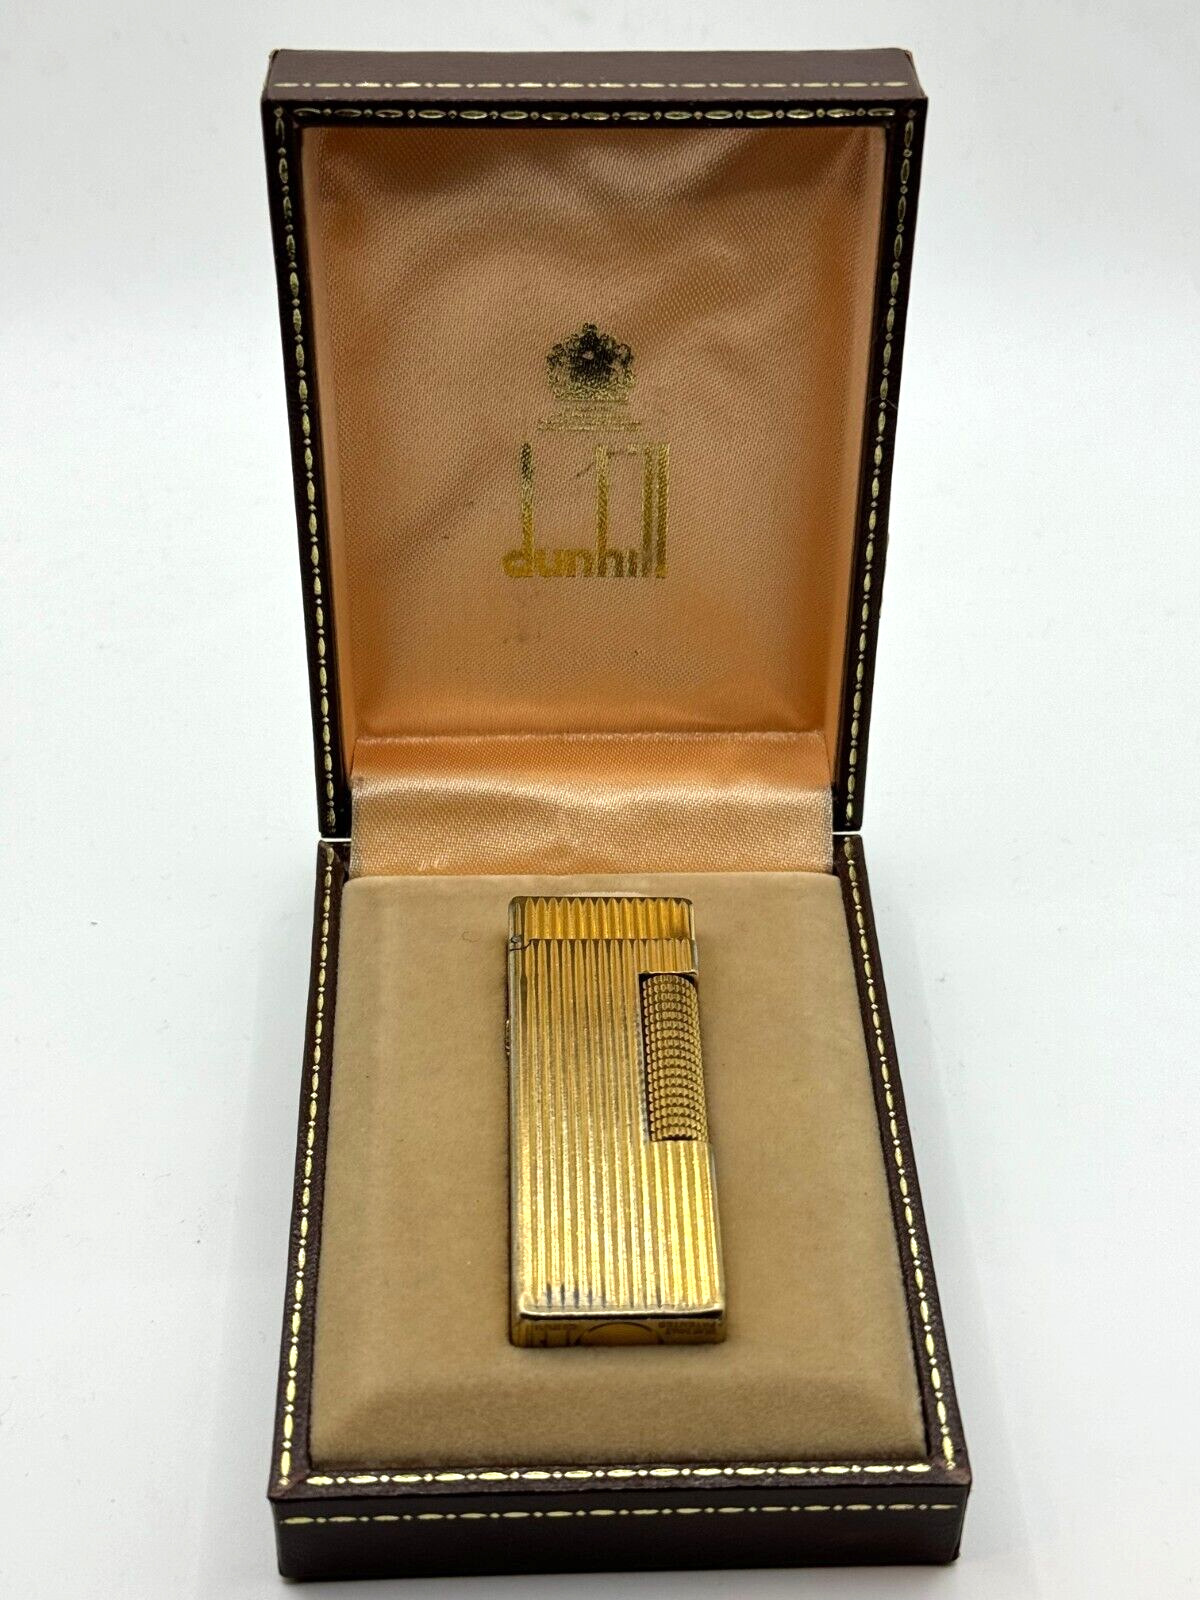 Vintage Dunhill Gold Plated Rollagas Cigarette Lighter w Original Box